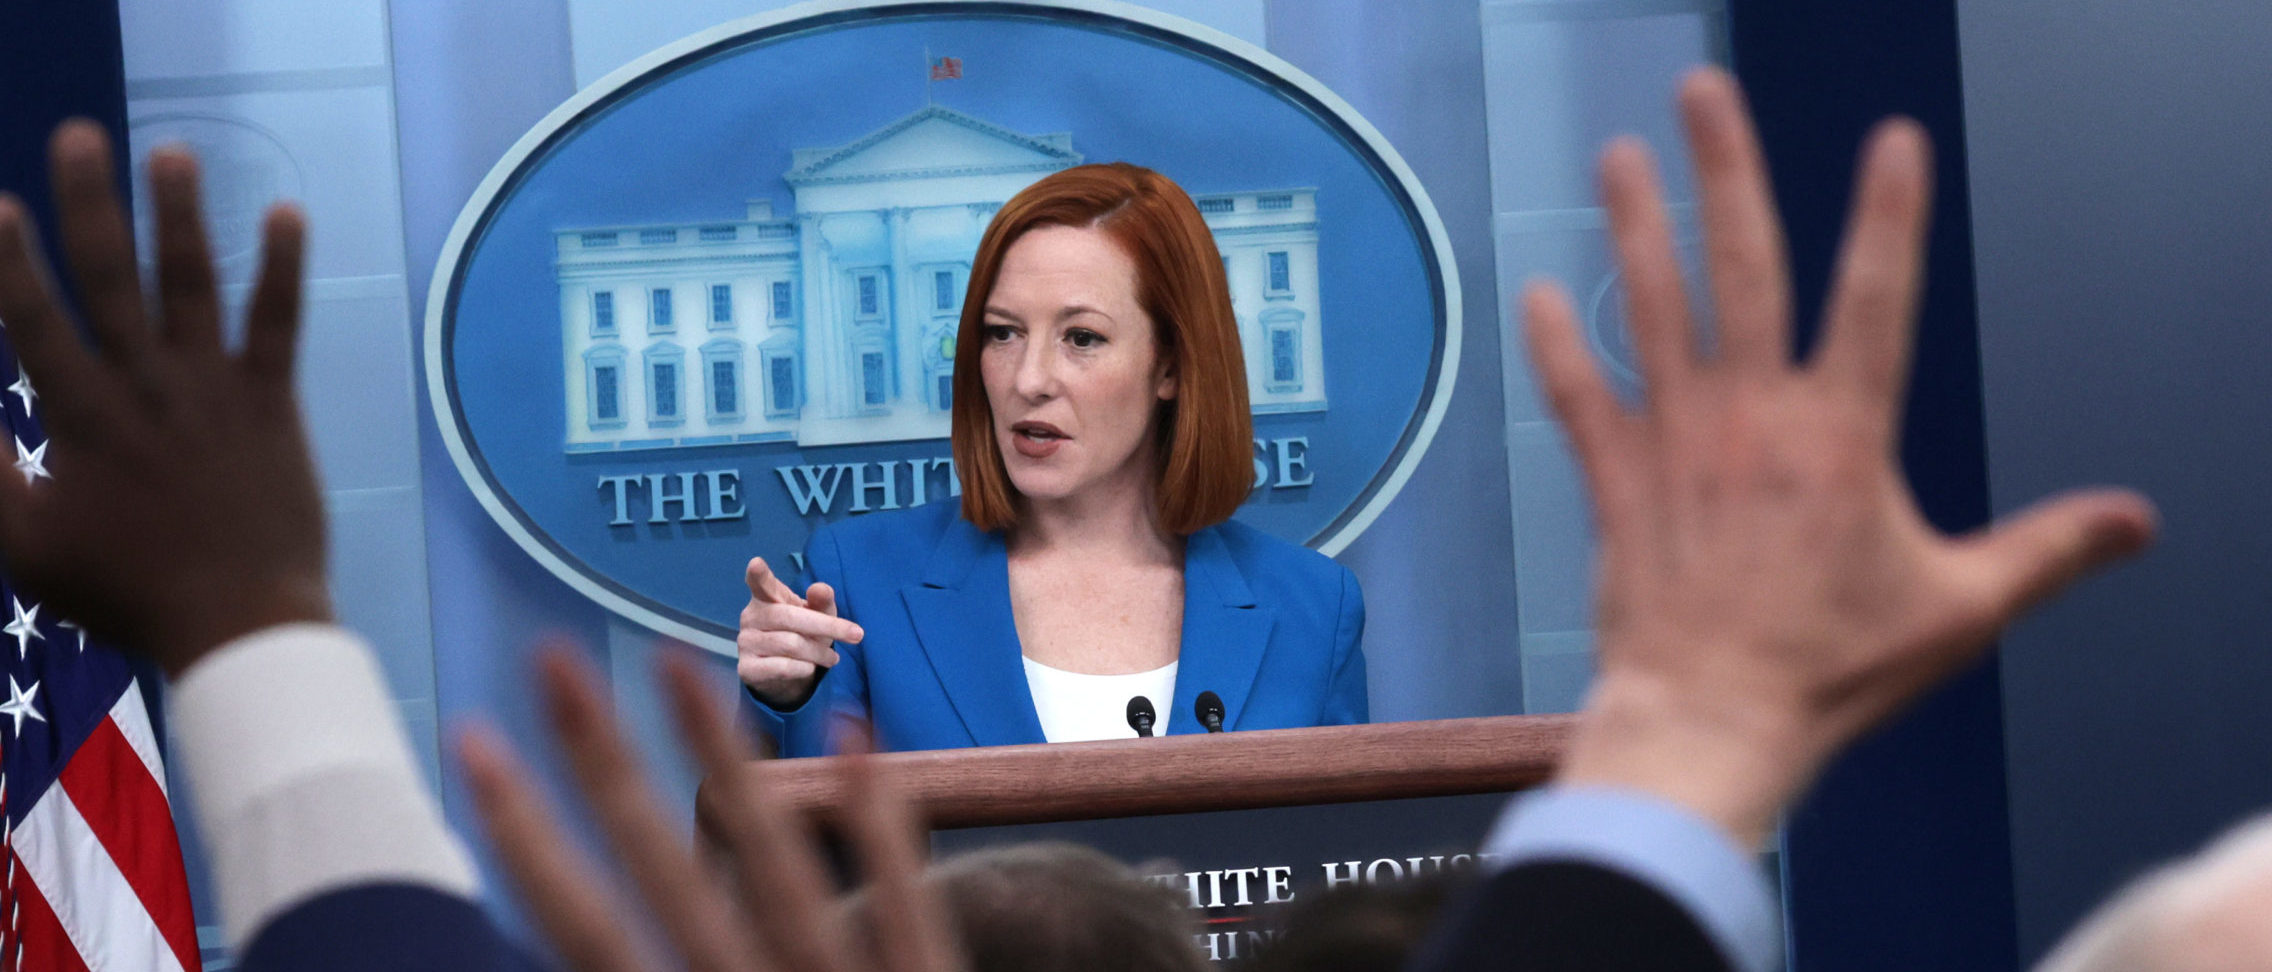 WASHINGTON, DC - MARCH 21: White House Press Secretary Jen Psaki takes questions during a White House daily press briefing at the James S. Brady Press Briefing Room of the White House on March 21, 2022 in Washington, DC. Psaki held a daily press briefing to answer questions from members of the press. (Photo by Alex Wong/Getty Images)